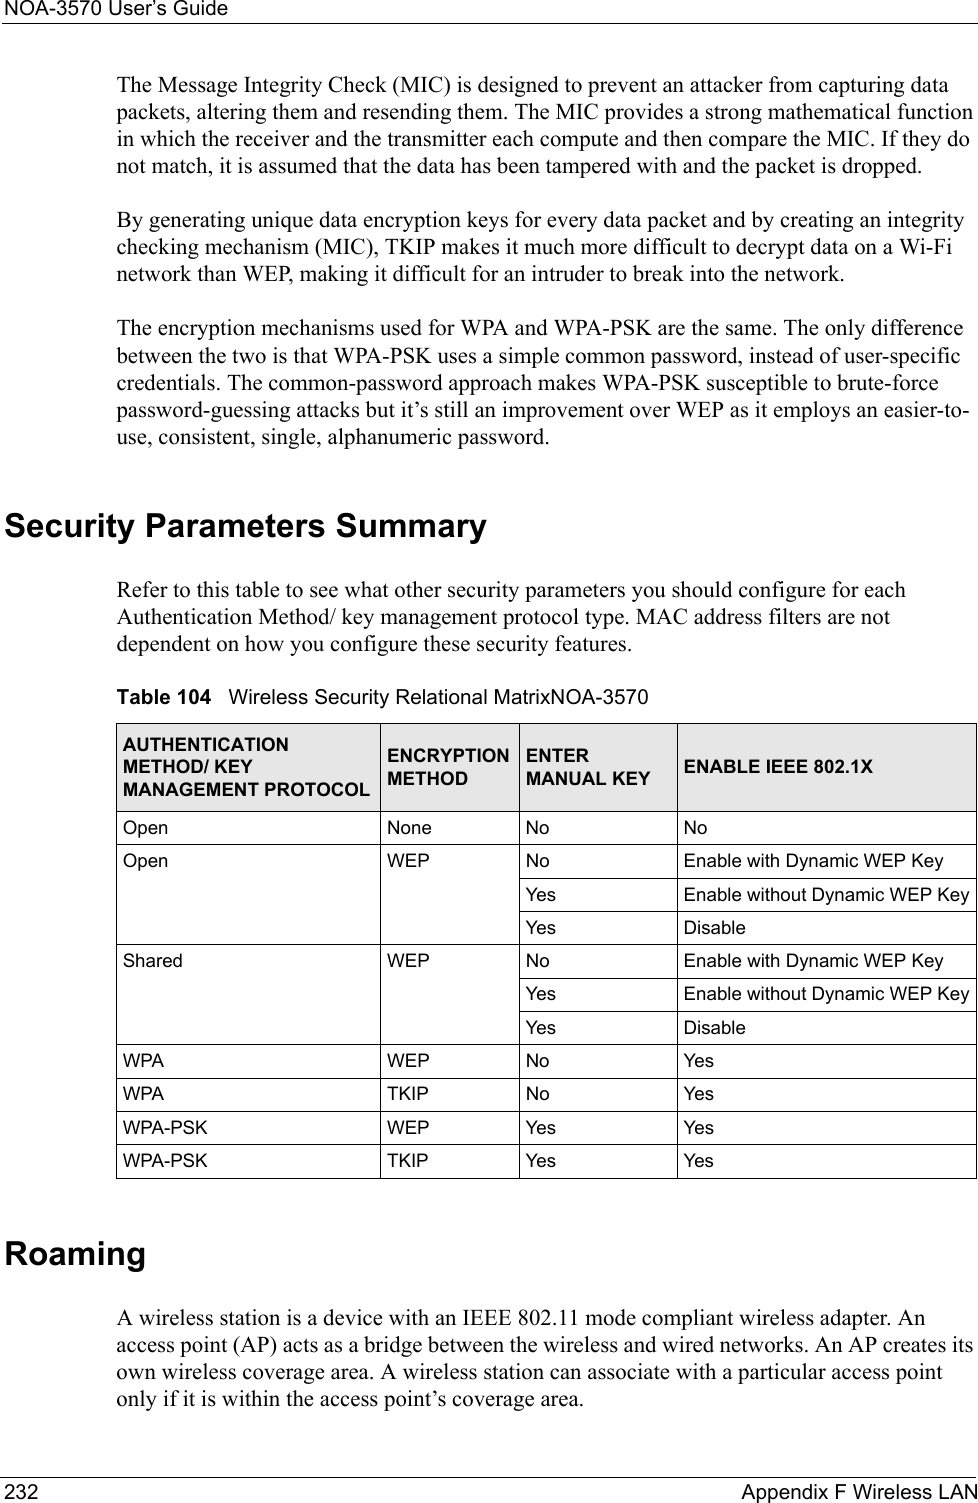 NOA-3570 User’s Guide232 Appendix F Wireless LANThe Message Integrity Check (MIC) is designed to prevent an attacker from capturing data packets, altering them and resending them. The MIC provides a strong mathematical function in which the receiver and the transmitter each compute and then compare the MIC. If they do not match, it is assumed that the data has been tampered with and the packet is dropped. By generating unique data encryption keys for every data packet and by creating an integrity checking mechanism (MIC), TKIP makes it much more difficult to decrypt data on a Wi-Fi network than WEP, making it difficult for an intruder to break into the network. The encryption mechanisms used for WPA and WPA-PSK are the same. The only difference between the two is that WPA-PSK uses a simple common password, instead of user-specific credentials. The common-password approach makes WPA-PSK susceptible to brute-force password-guessing attacks but it’s still an improvement over WEP as it employs an easier-to-use, consistent, single, alphanumeric password.Security Parameters SummaryRefer to this table to see what other security parameters you should configure for each Authentication Method/ key management protocol type. MAC address filters are not dependent on how you configure these security features.RoamingA wireless station is a device with an IEEE 802.11 mode compliant wireless adapter. An access point (AP) acts as a bridge between the wireless and wired networks. An AP creates its own wireless coverage area. A wireless station can associate with a particular access point only if it is within the access point’s coverage area.Table 104   Wireless Security Relational MatrixNOA-3570AUTHENTICATION METHOD/ KEY MANAGEMENT PROTOCOLENCRYPTION METHODENTER MANUAL KEY ENABLE IEEE 802.1X Open None No NoOpen WEP No Enable with Dynamic WEP Key Yes Enable without Dynamic WEP KeyYes Disable Shared WEP  No Enable with Dynamic WEP KeyYes Enable without Dynamic WEP KeyYes Disable WPA WEP No YesWPA TKIP No YesWPA-PSK WEP Yes Yes WPA-PSK TKIP Yes Yes